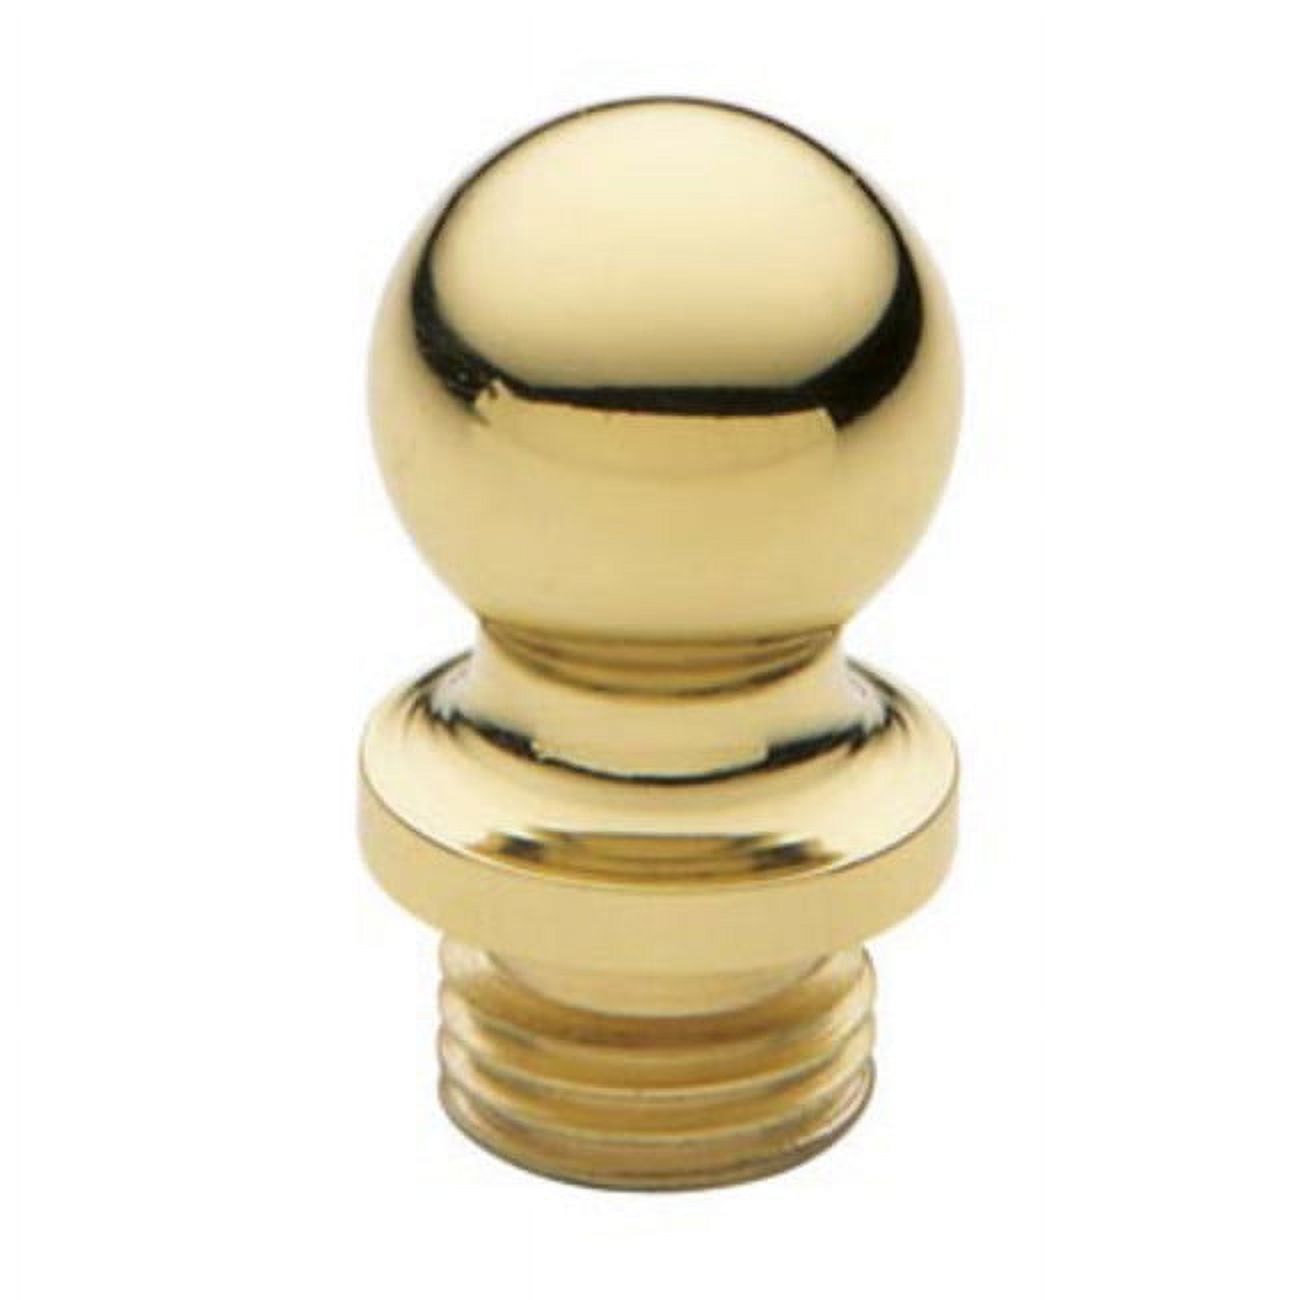 Baldwin 1090.I Solid Brass Ball Tip Finial For Square Corner Hinges (Quantity 2) - Brass - image 1 of 1